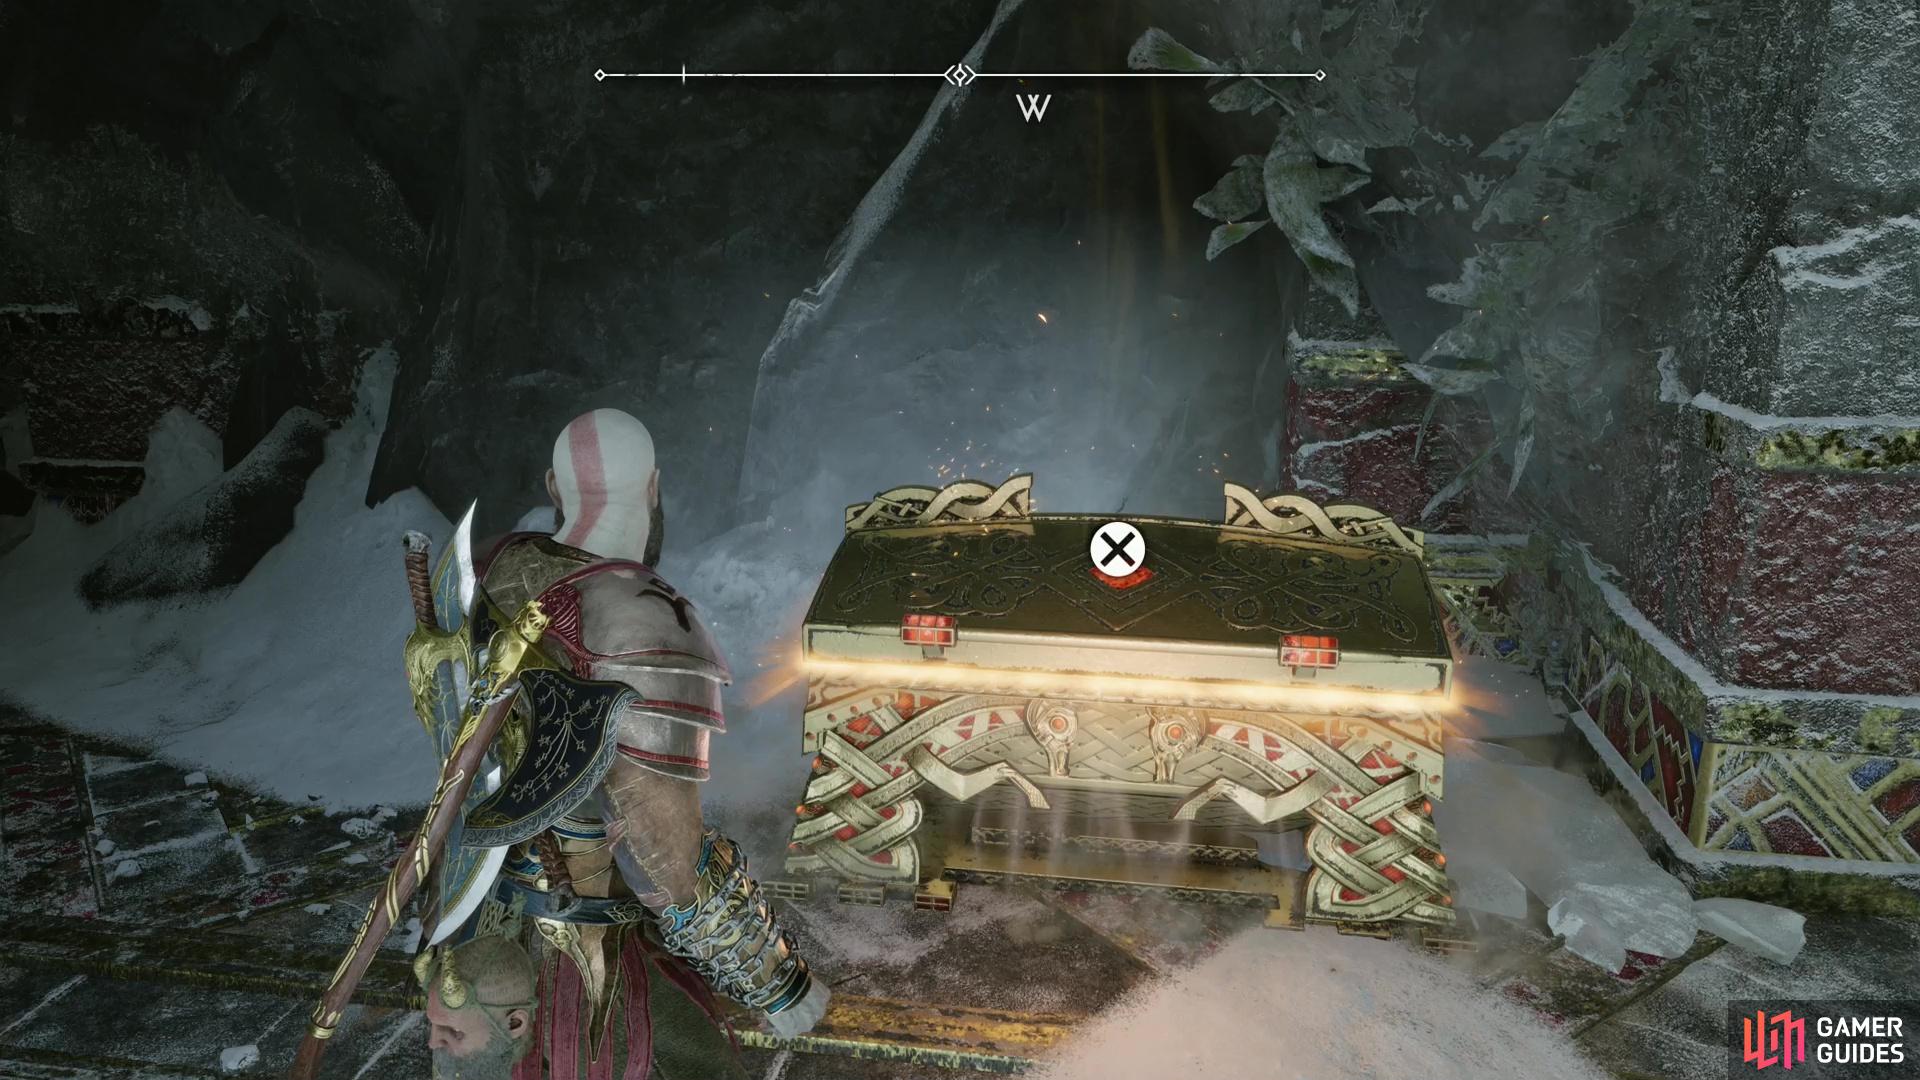 After opening (and running through) the gate behind the shield you’ll find a Legendary Chest, within which you’ll find the Sigil Punishment accesory.